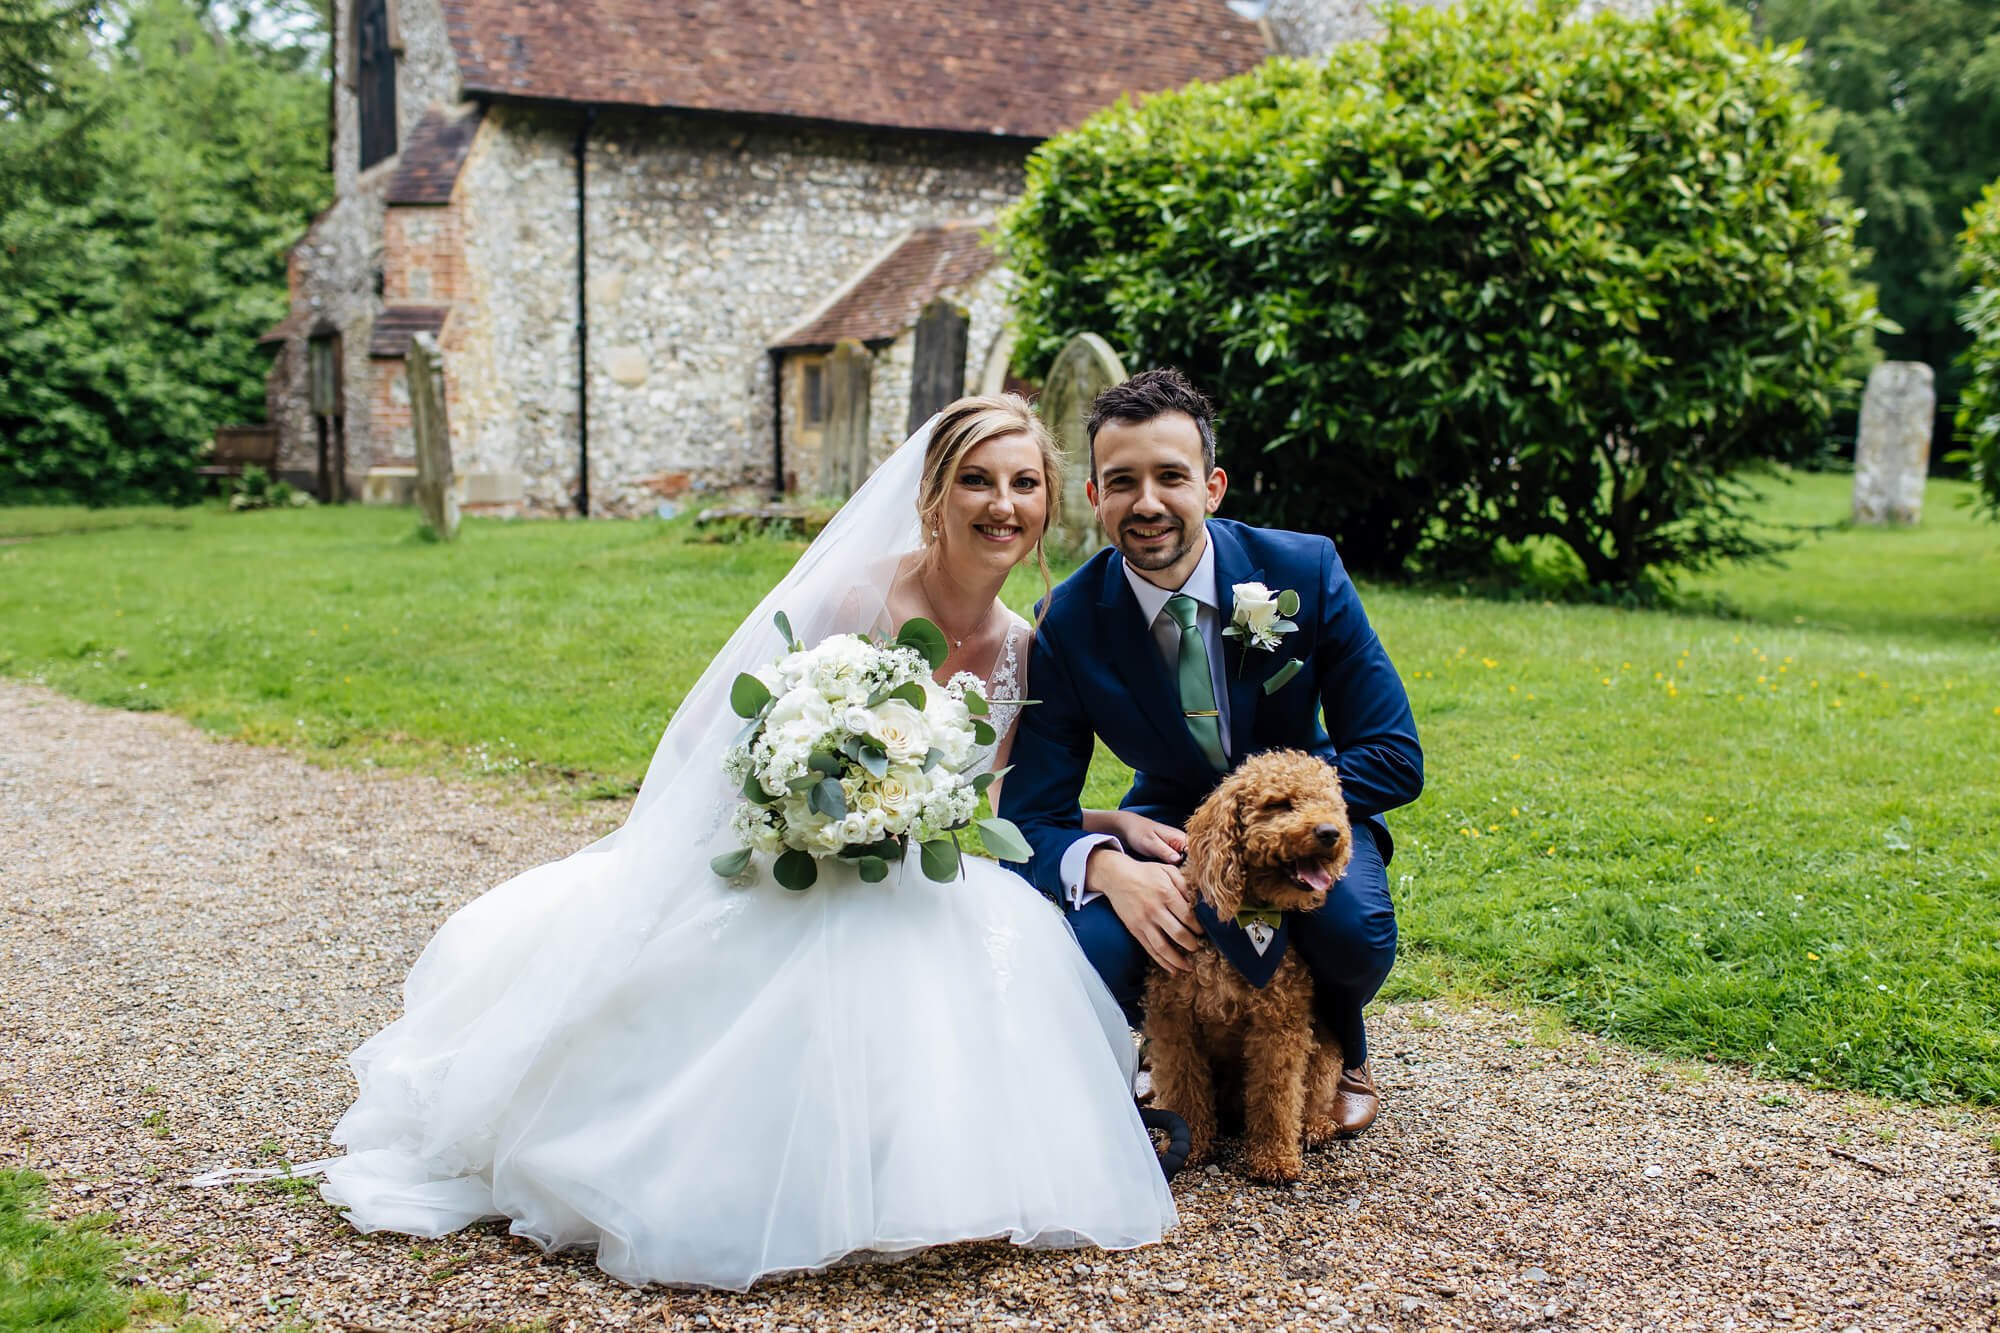 Bride and groom pose with their dog in the church yard